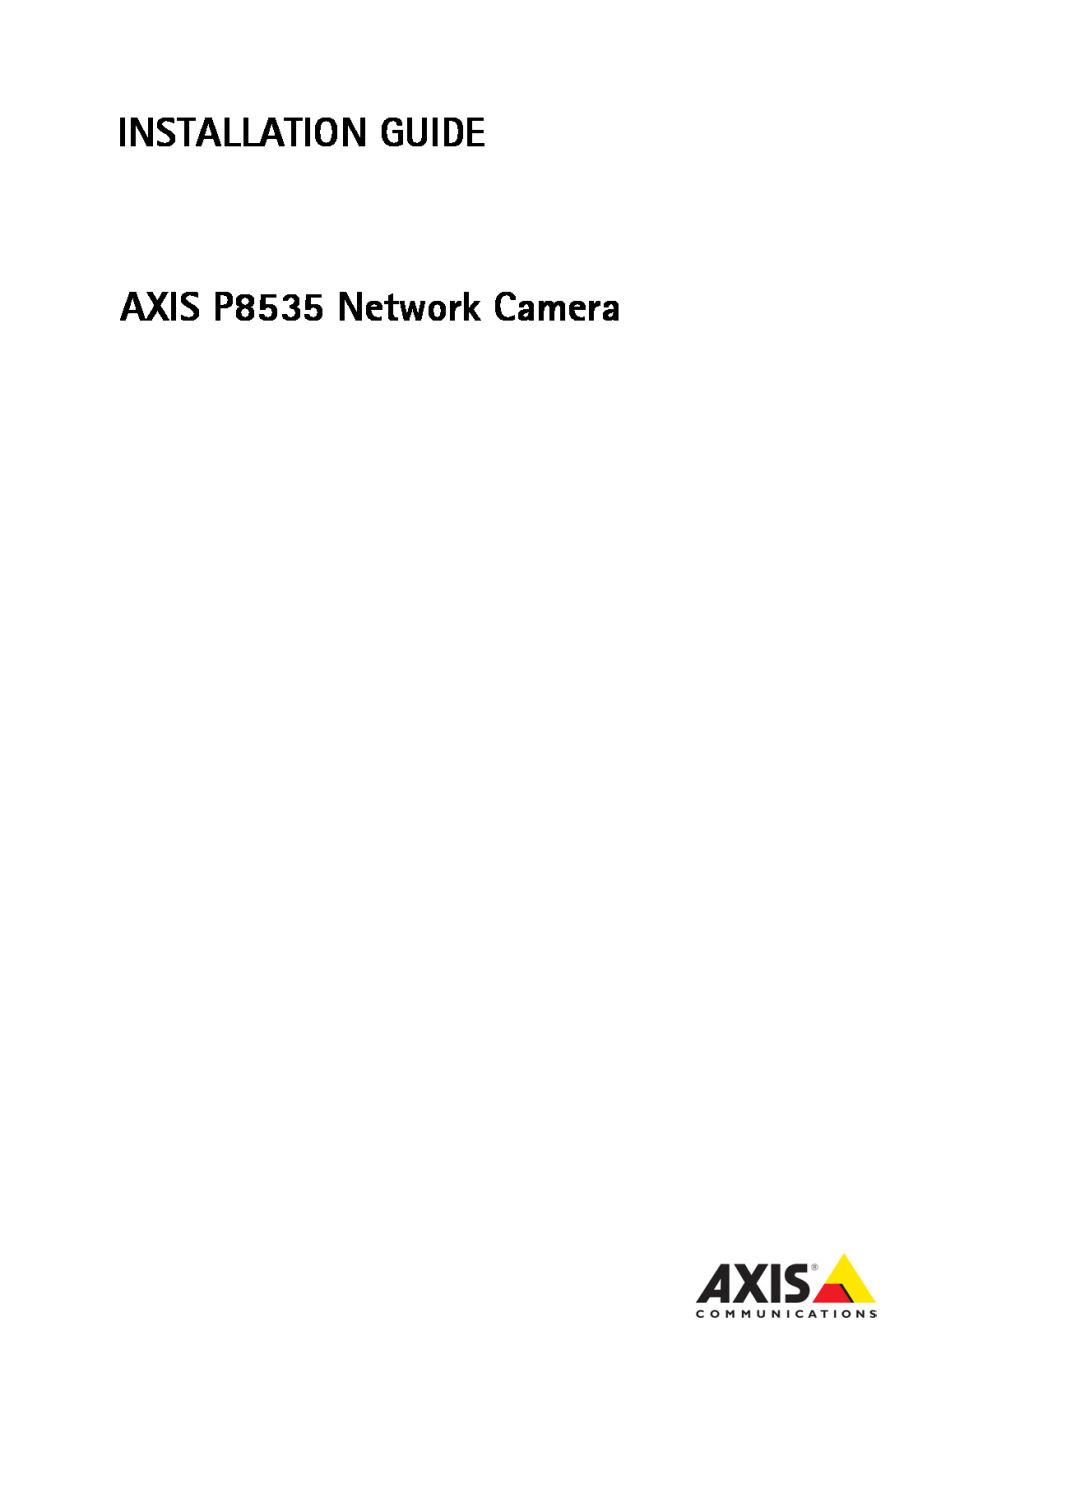 Axis Communications manual INSTALLATION GUIDE AXIS P8535 Network Camera 